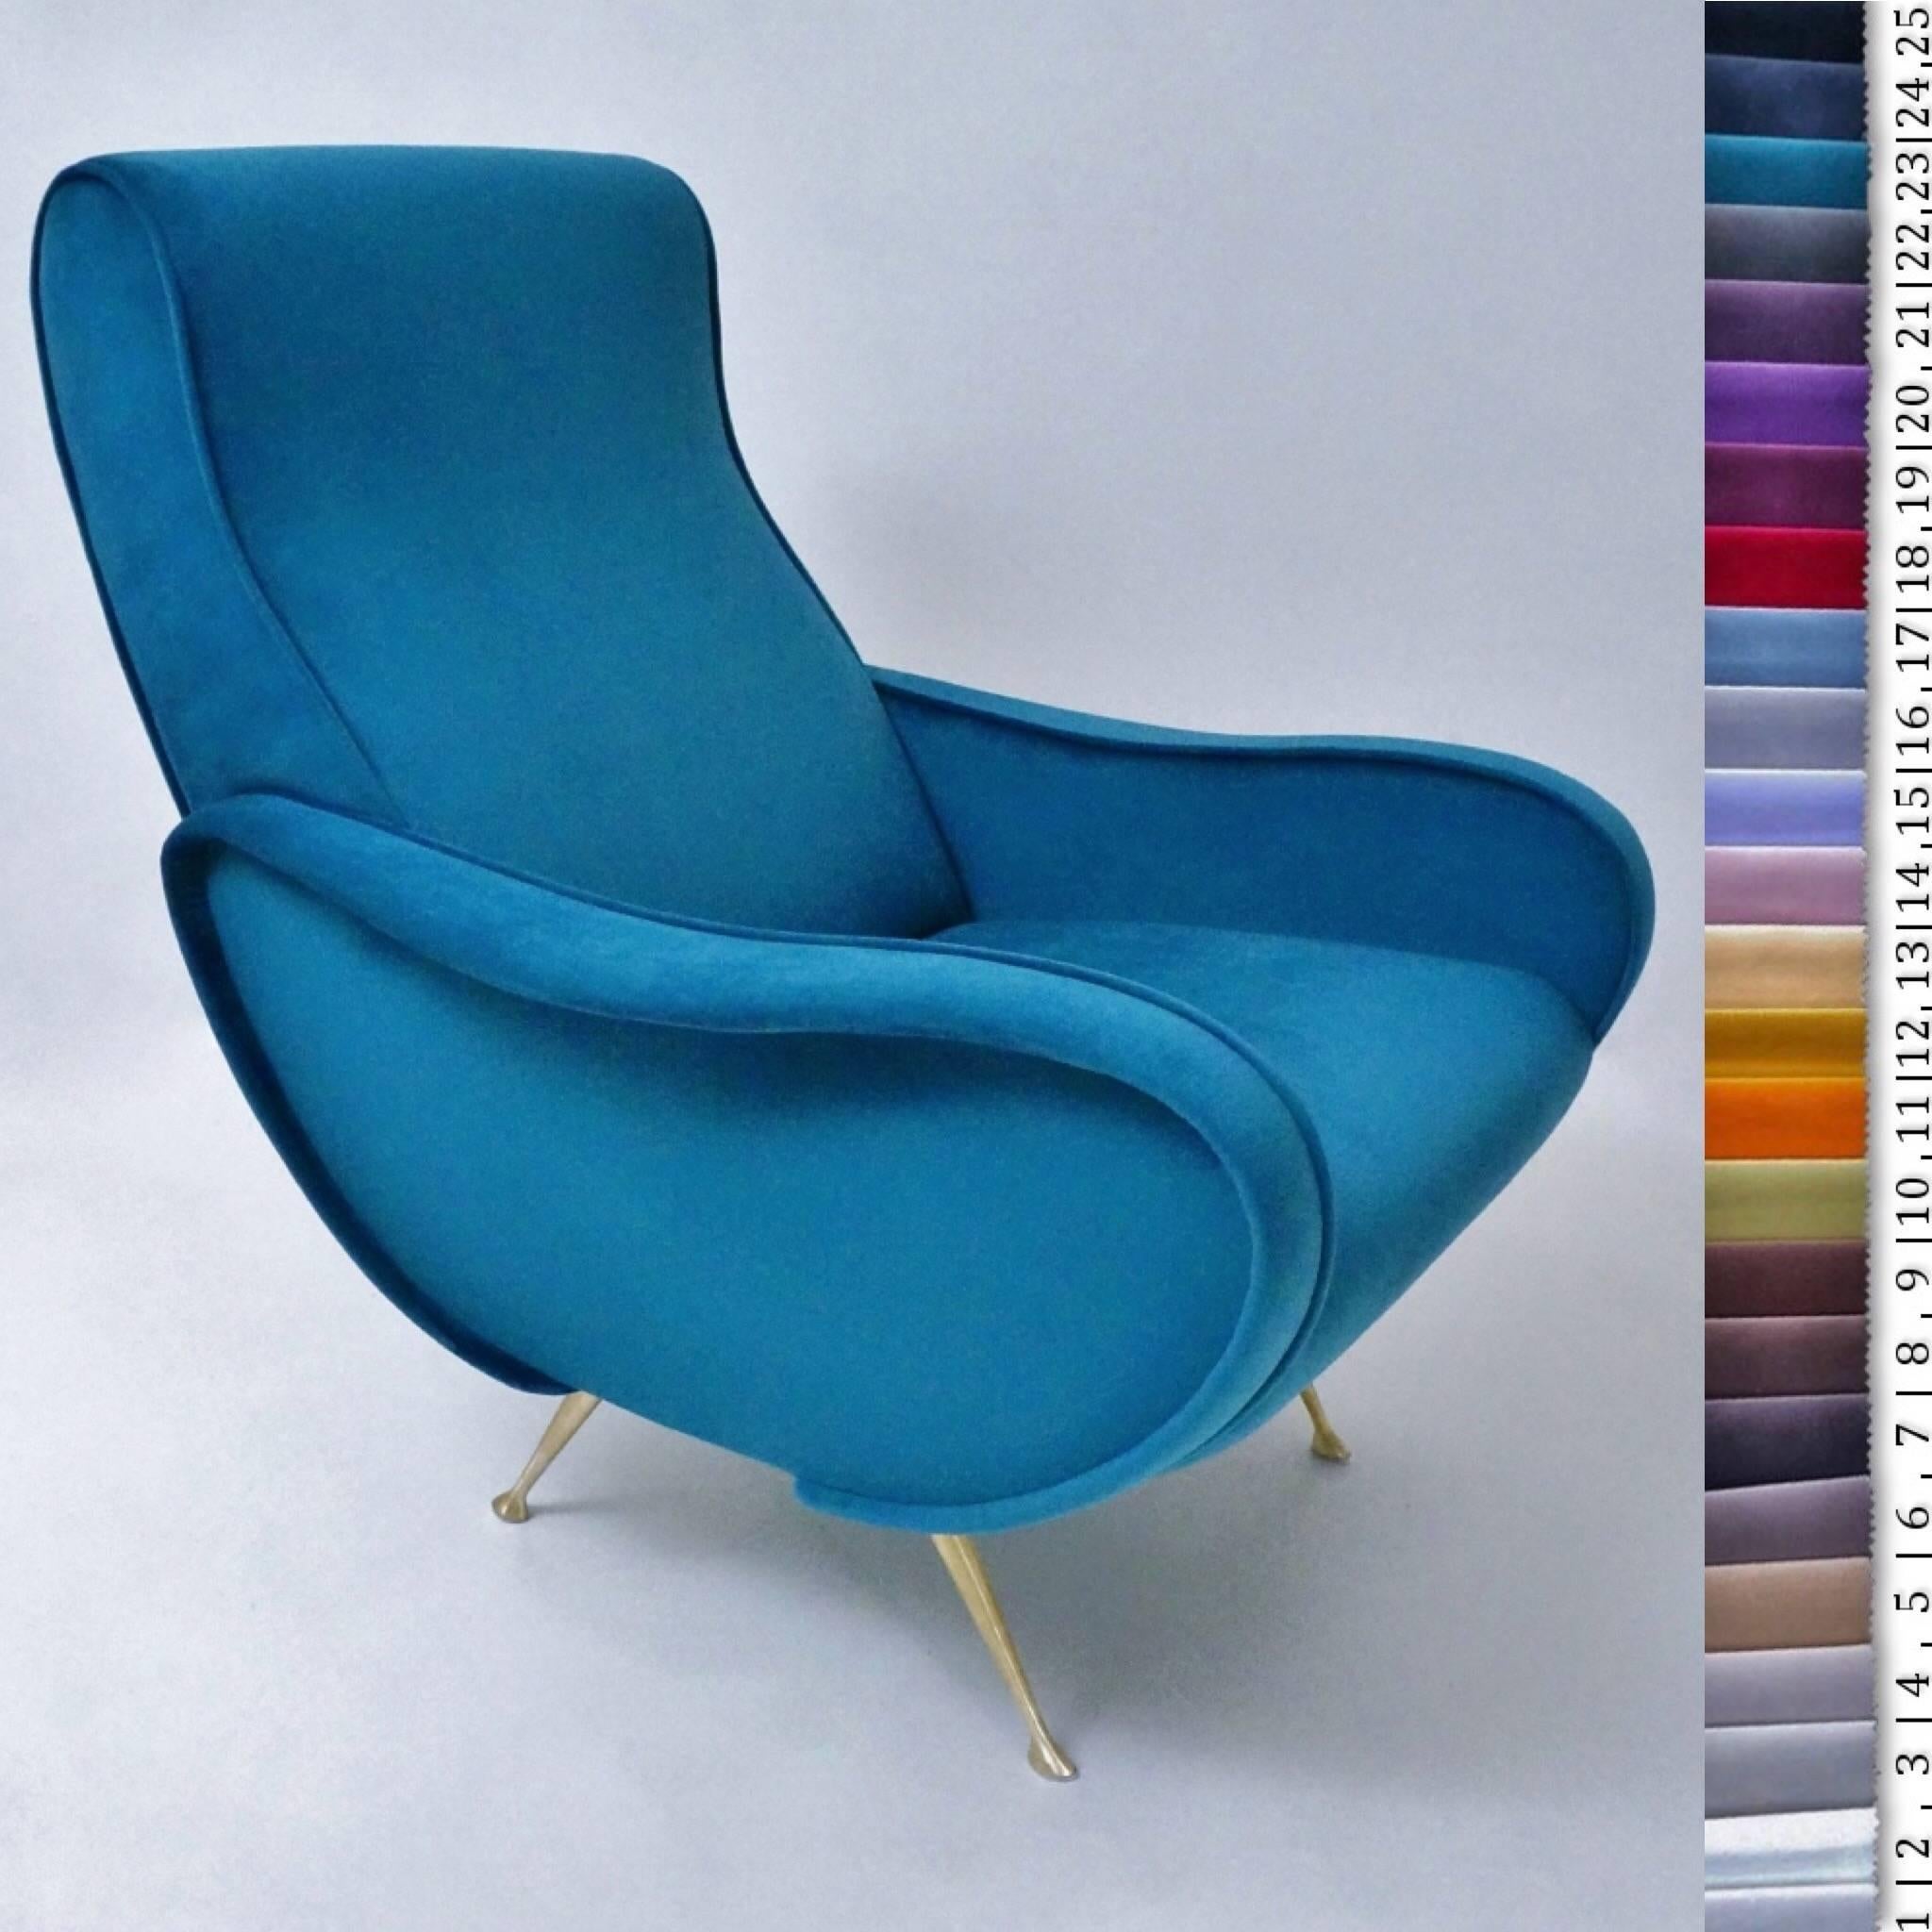 1950s style armchair newly made to order in a choice of 25 colors, Italian.

In new teal velvet upholstery with solid handmade brass legs, Italian this armchair is made to order in Italy for Roomscape`s Contemporary Collection.

Available to